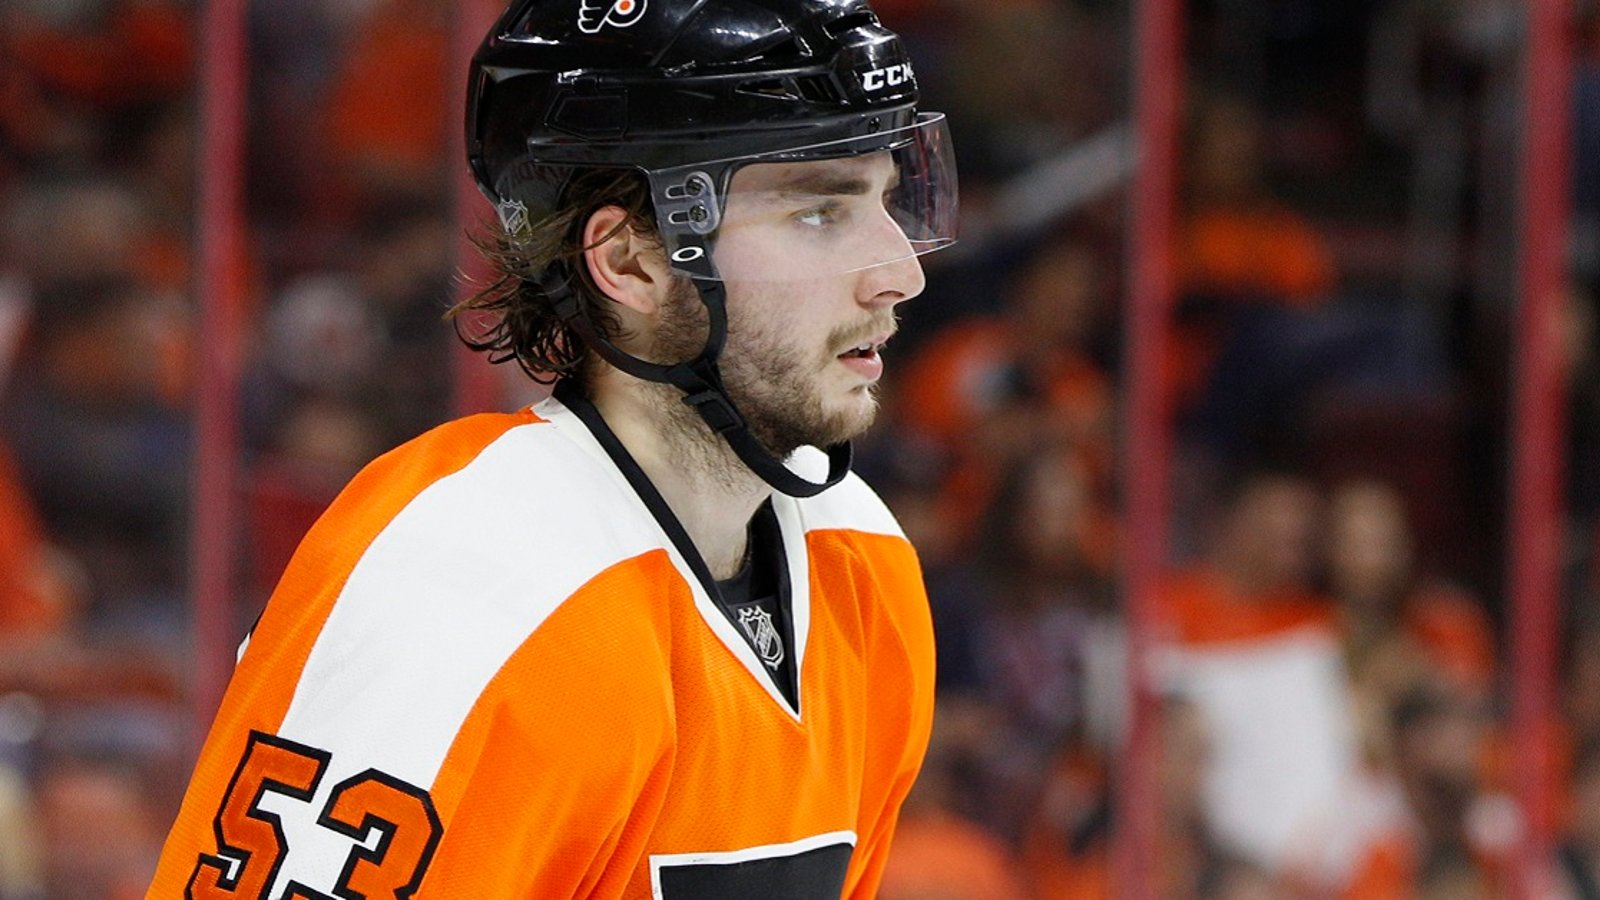 Gostisbehere sounds ready for a bounce back after sophomore slump.